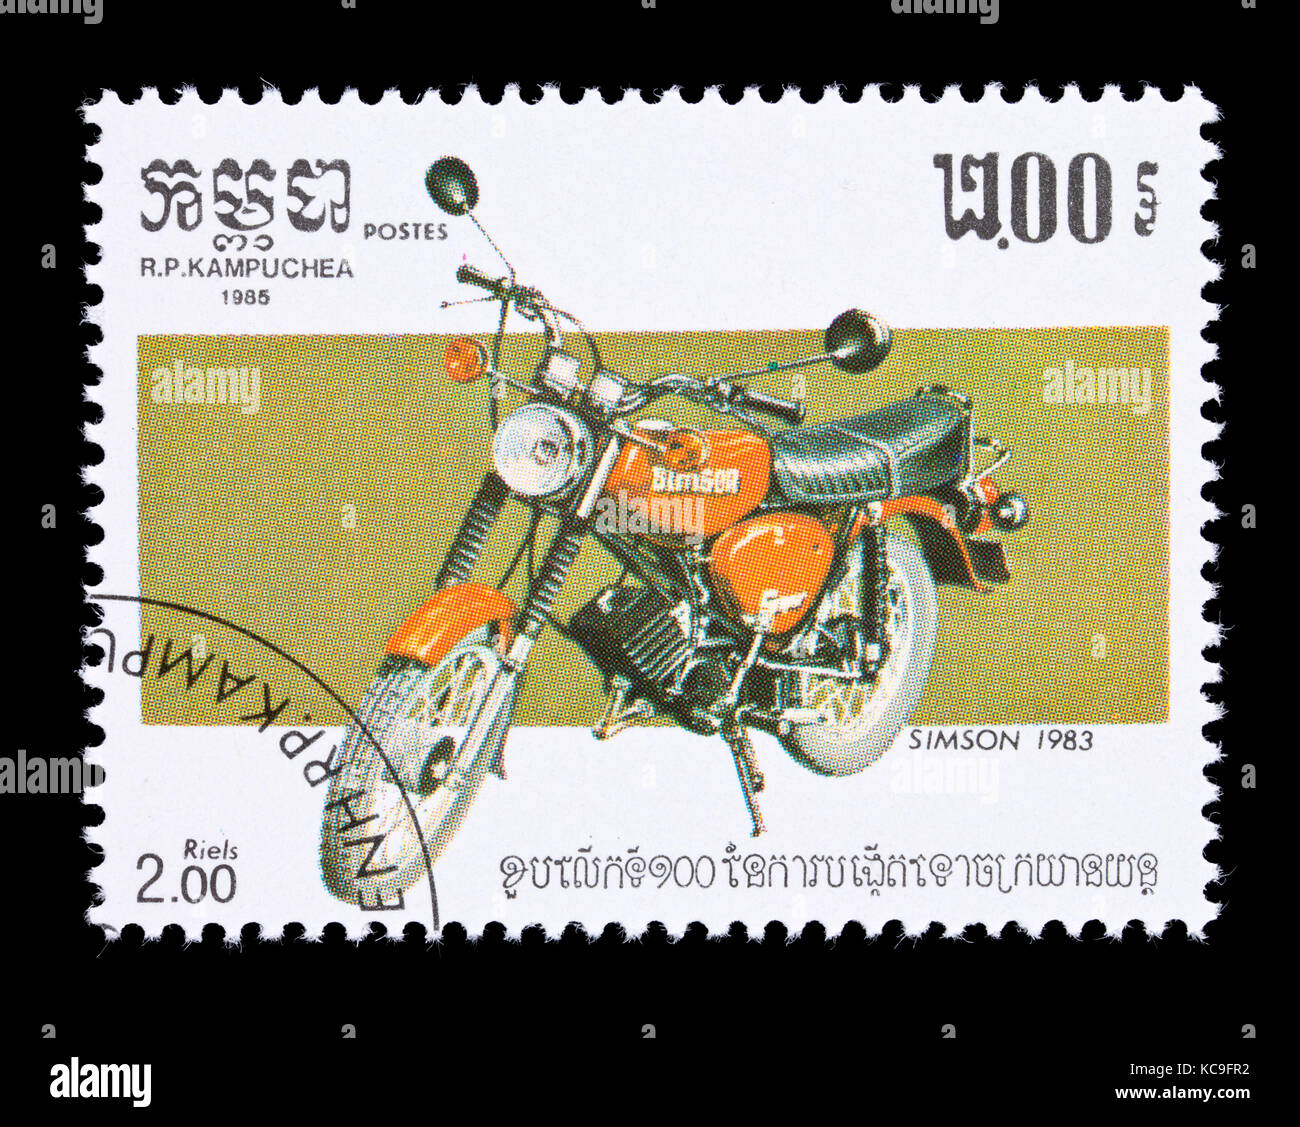 Postage stamp from Cambodia (Kampuchea) depicting a 1983 Simson motorcycle Stock Photo